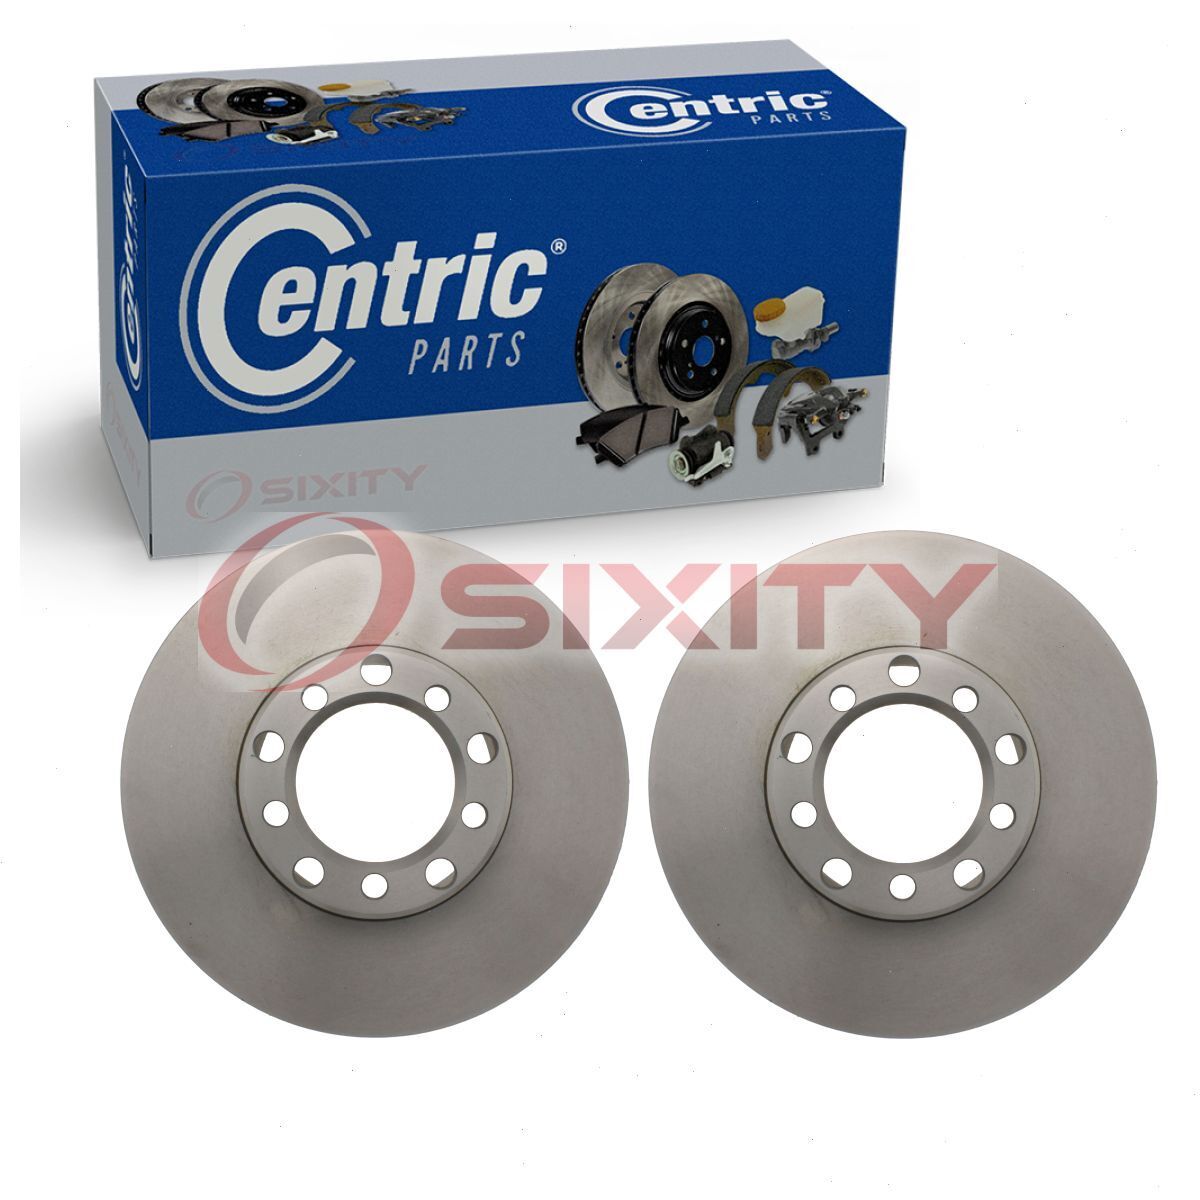 2 pc Centric Front Disc Brake Rotors for 1984-1985 Mercedes-Benz 500SEL nv